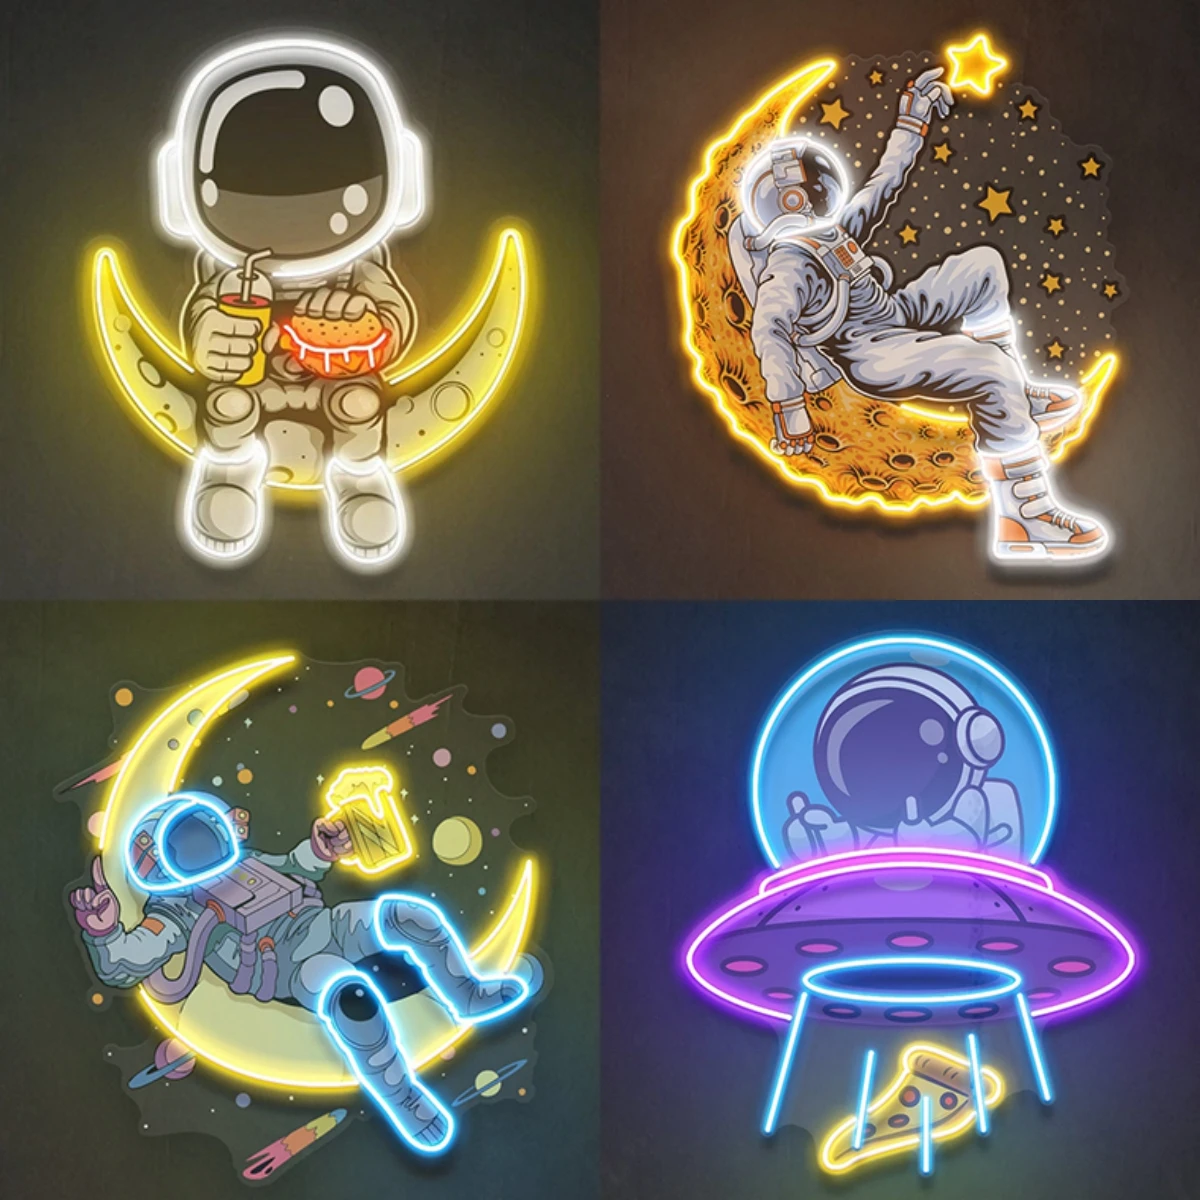 

Astronaut Led Neon Acrylic Artwork Sign Bedroom Home Neon Wall Decoration Handmade Custom Night Light Signs Personalized Gifts